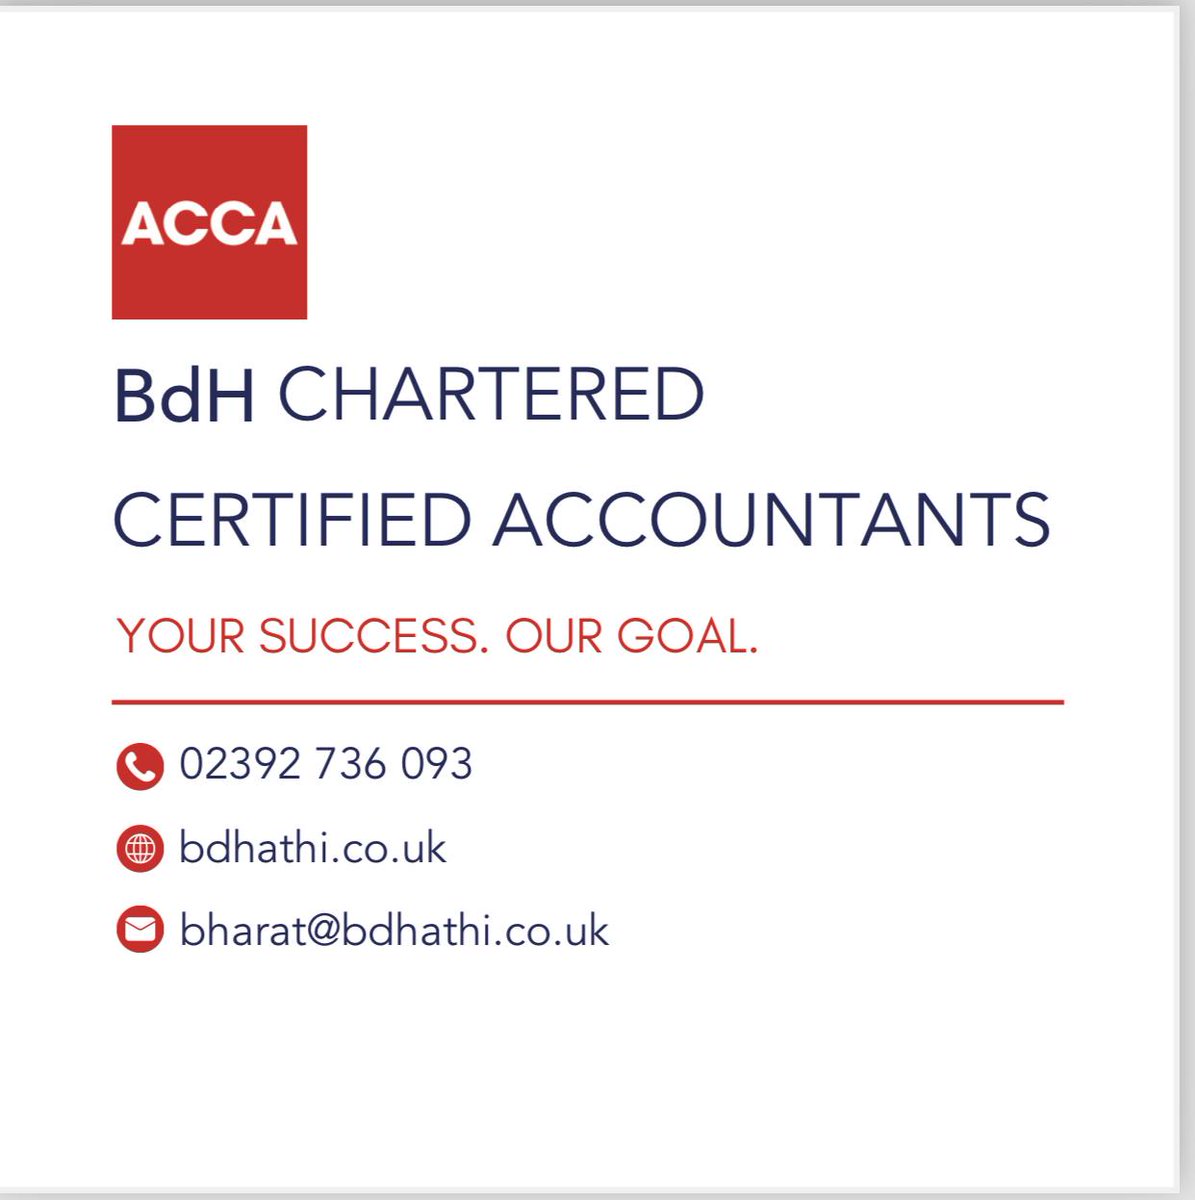 Welcome to BdH Chartered Accountants who have kindly sponsored the club this season. Another Portsmouth based company to add to our existing local companies that help the club financially behind the scenes.